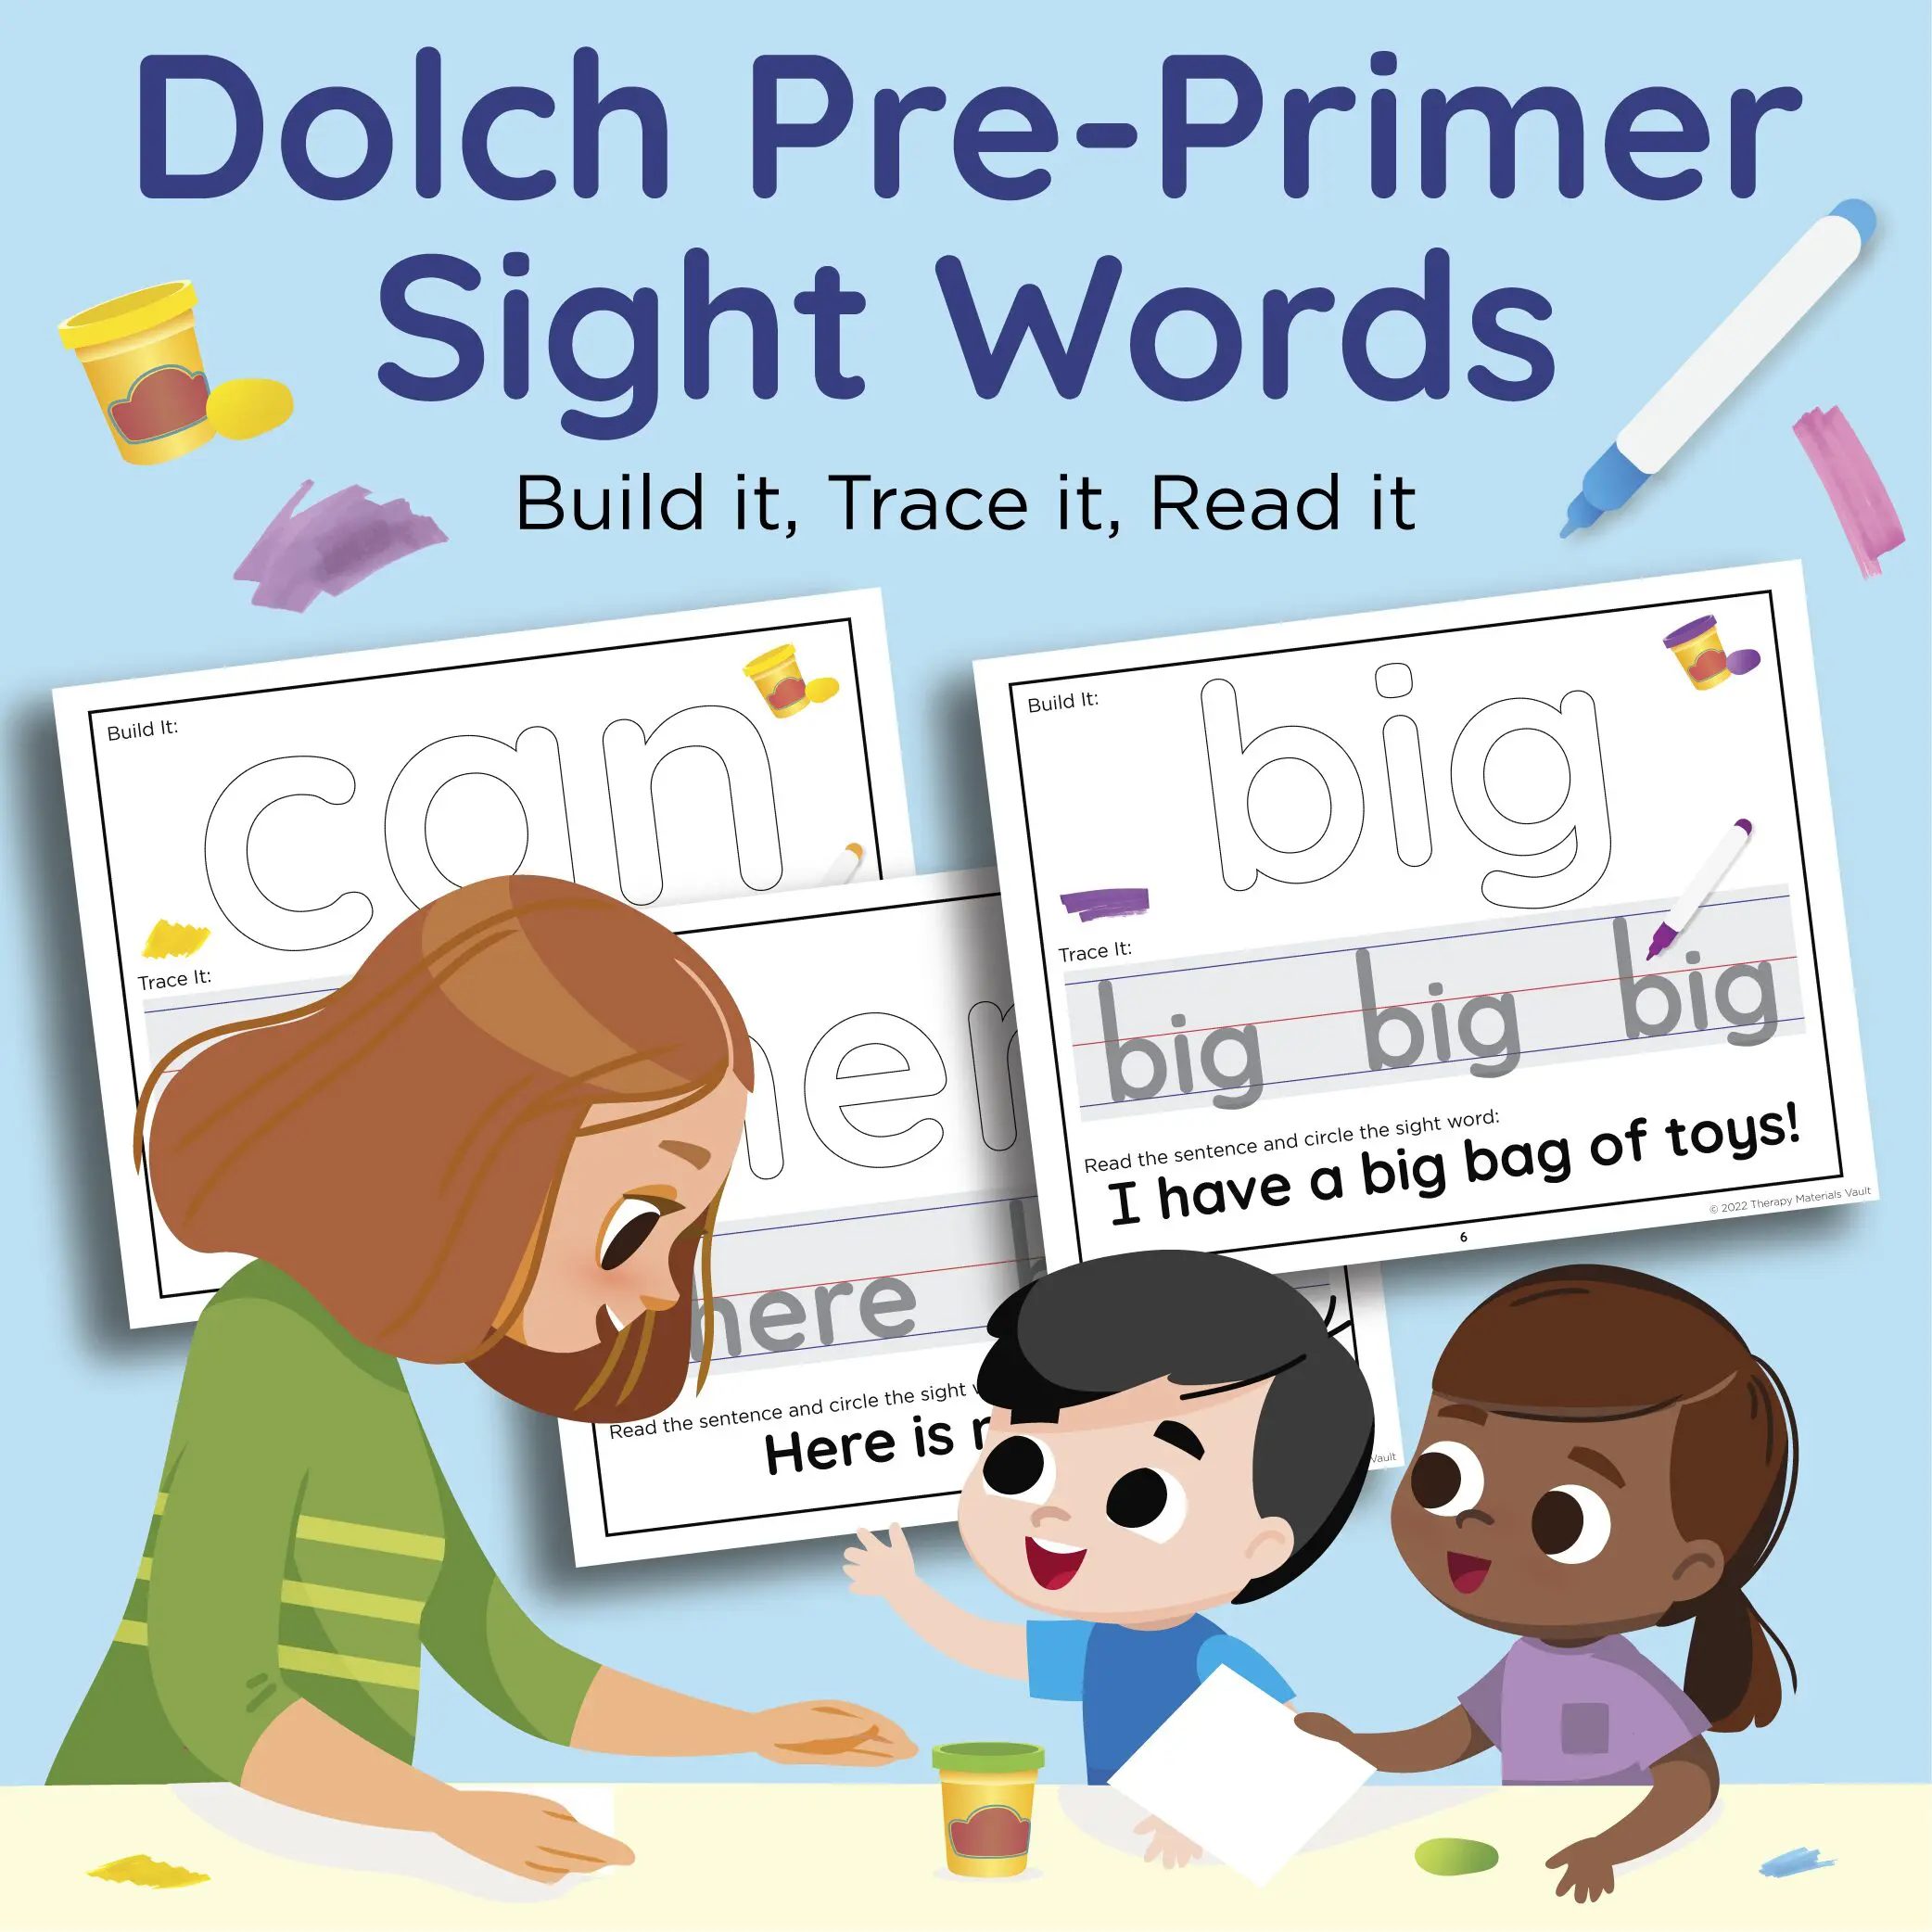 Dolch Pre-Primer Sight Words | CST Academy